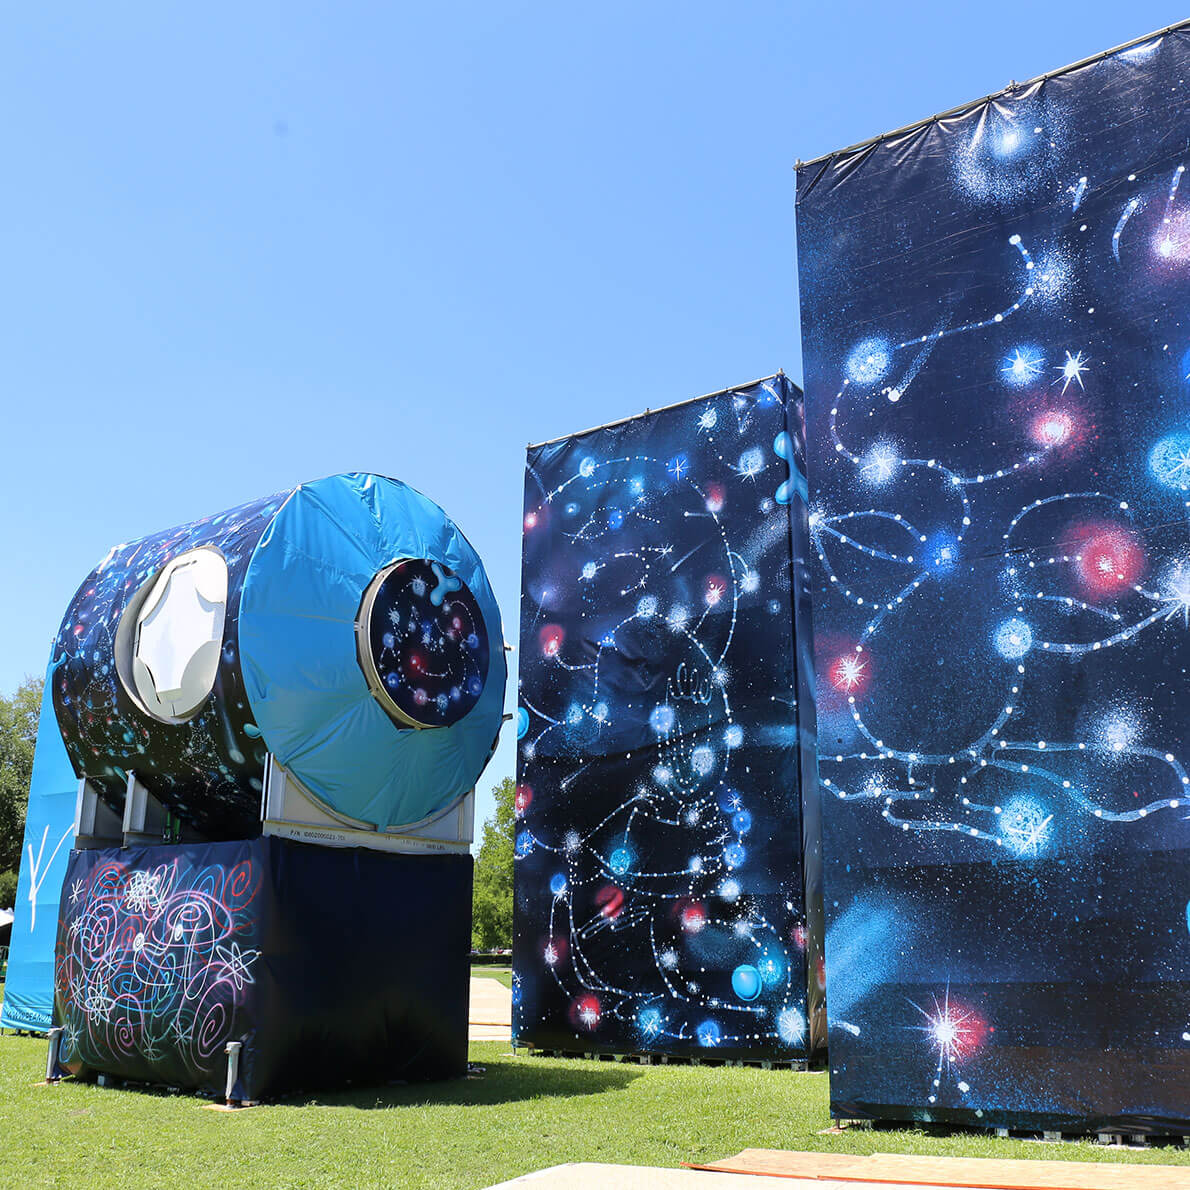 Three large, spray painted structures in a park. 